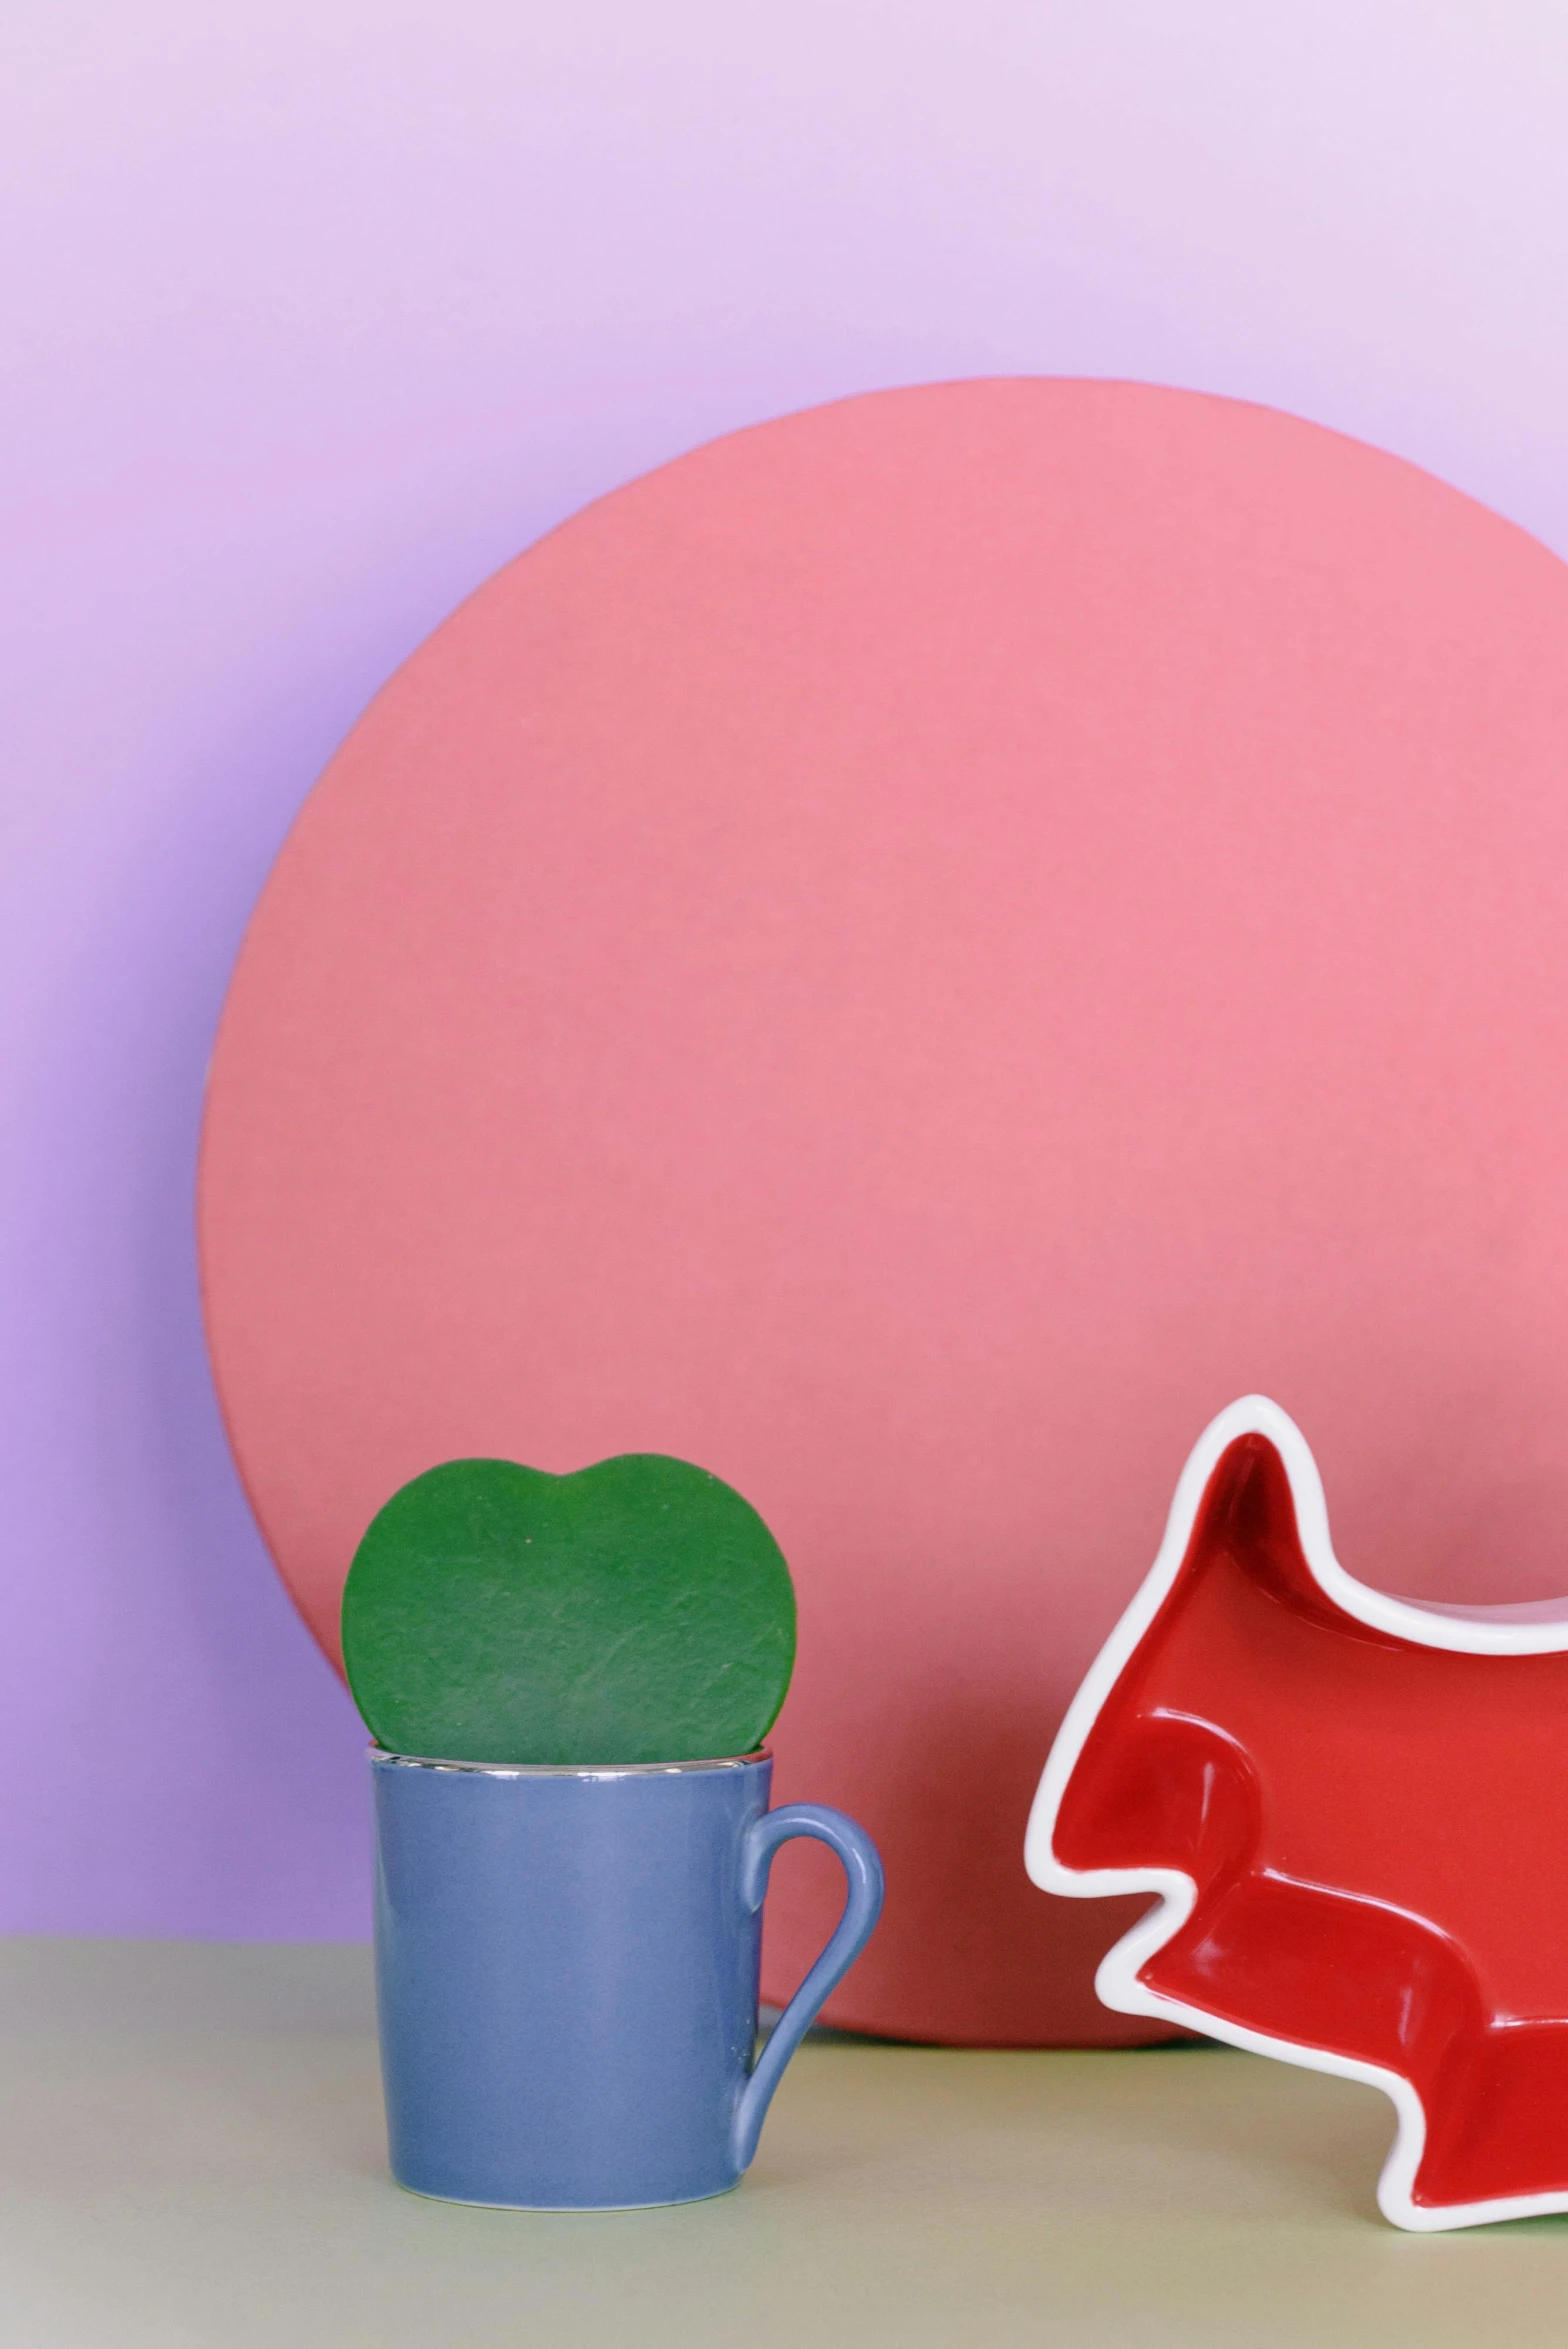 a red dog figurine next to a blue mug, an abstract sculpture, inspired by Tom Wesselmann, trending on pexels, color field, round mirror on the wall, green and purple studio lighting, pink pastel, made of glazed